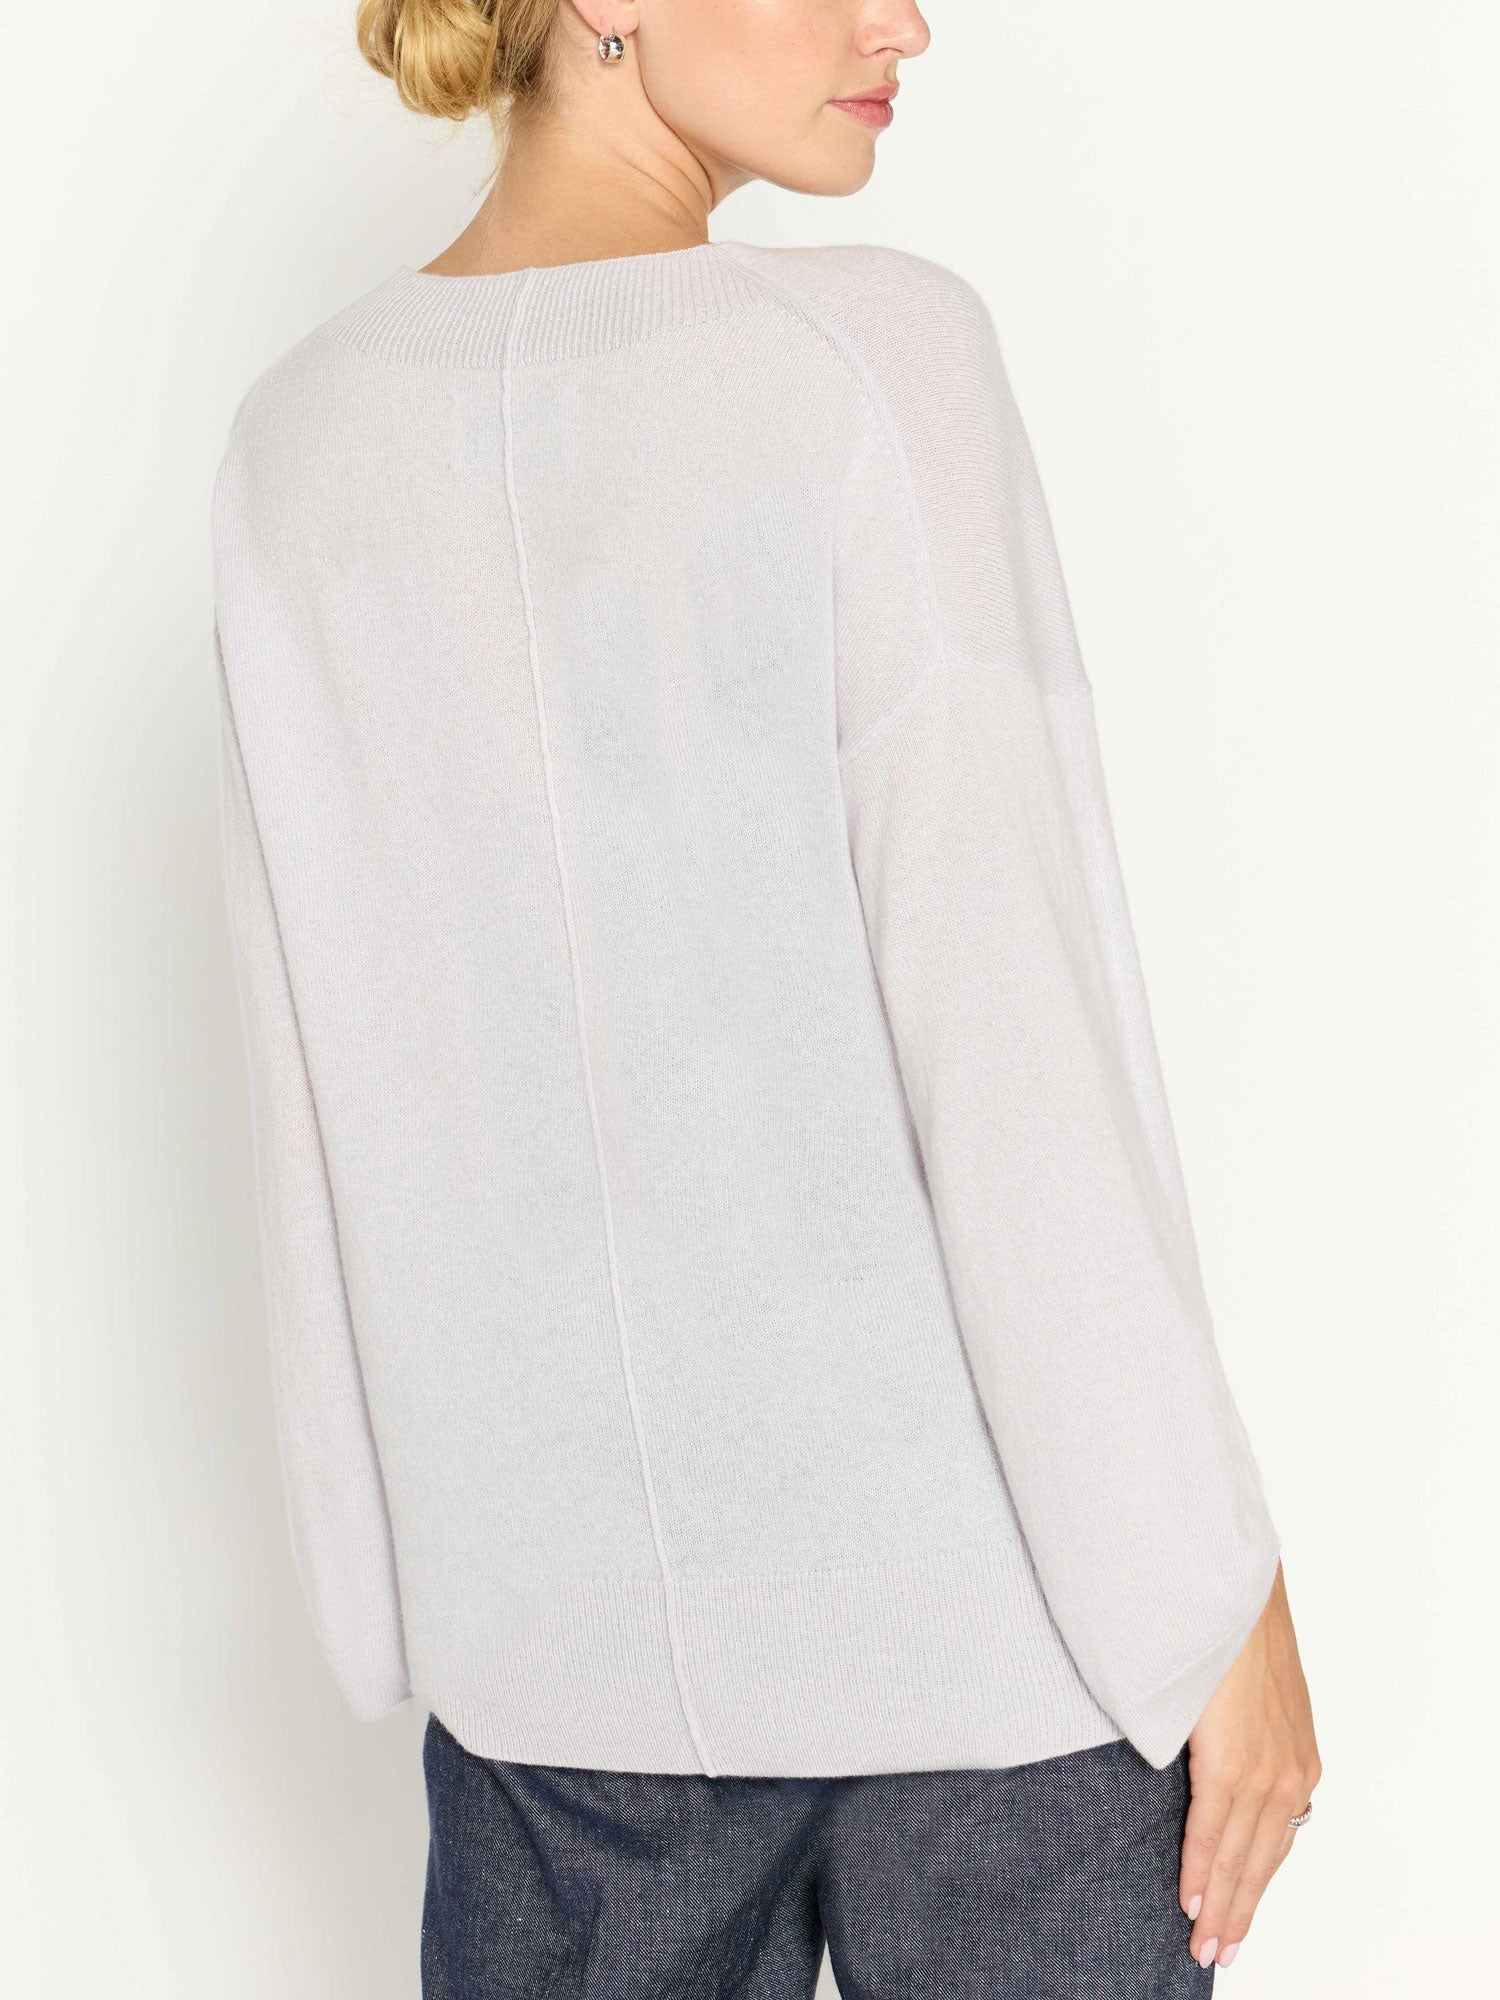 Casimir cashmere v-neck white sweater back view